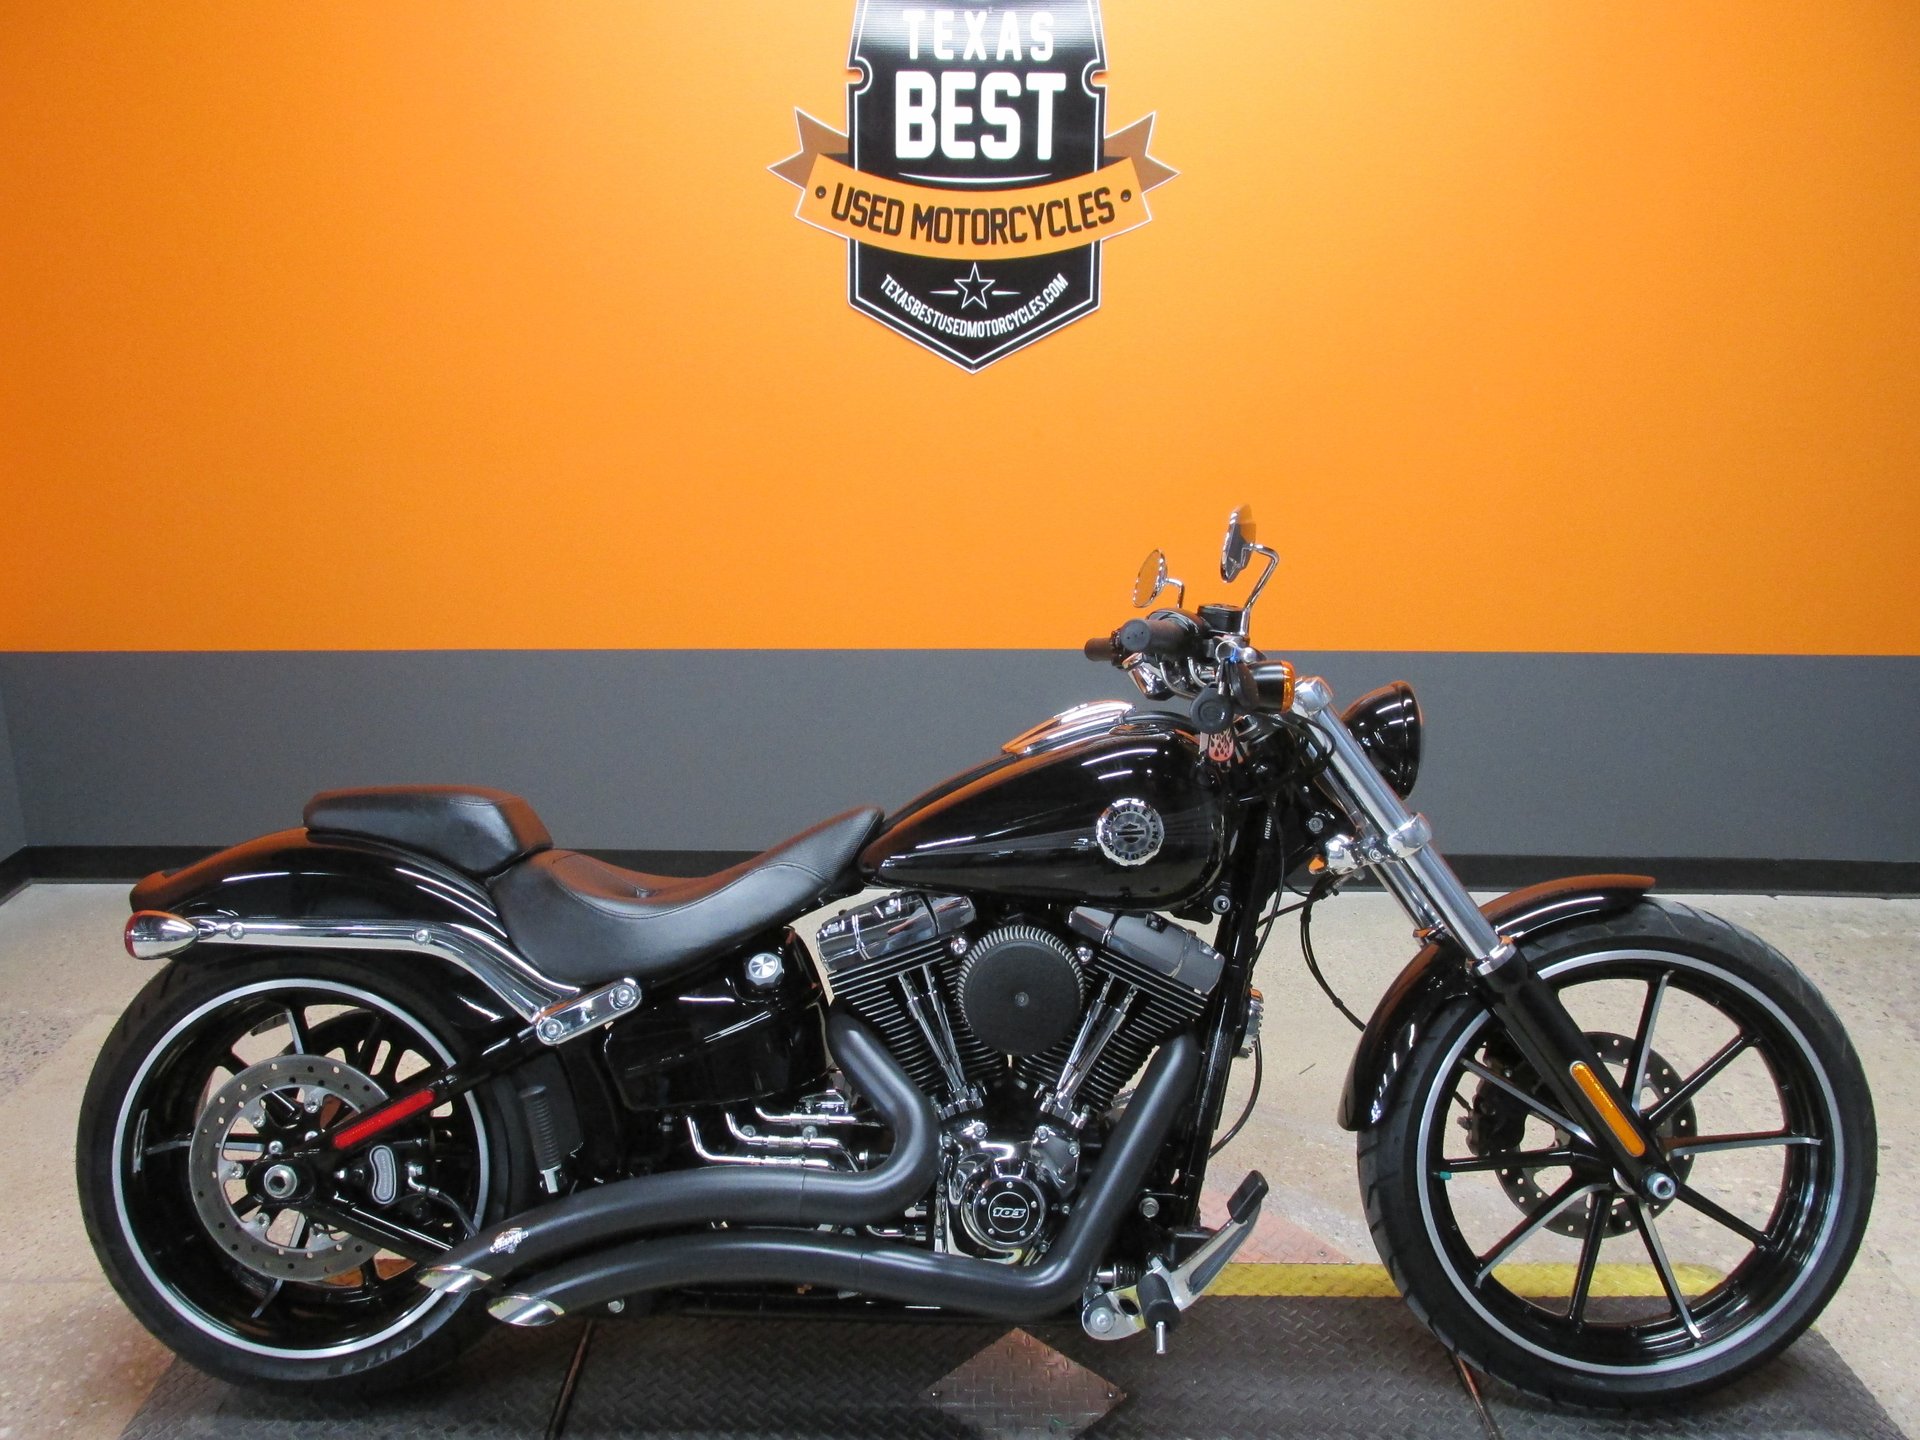 2014 Harley Davidson Softail Breakout American Motorcycle Trading Company Used Harley Davidson Motorcycles